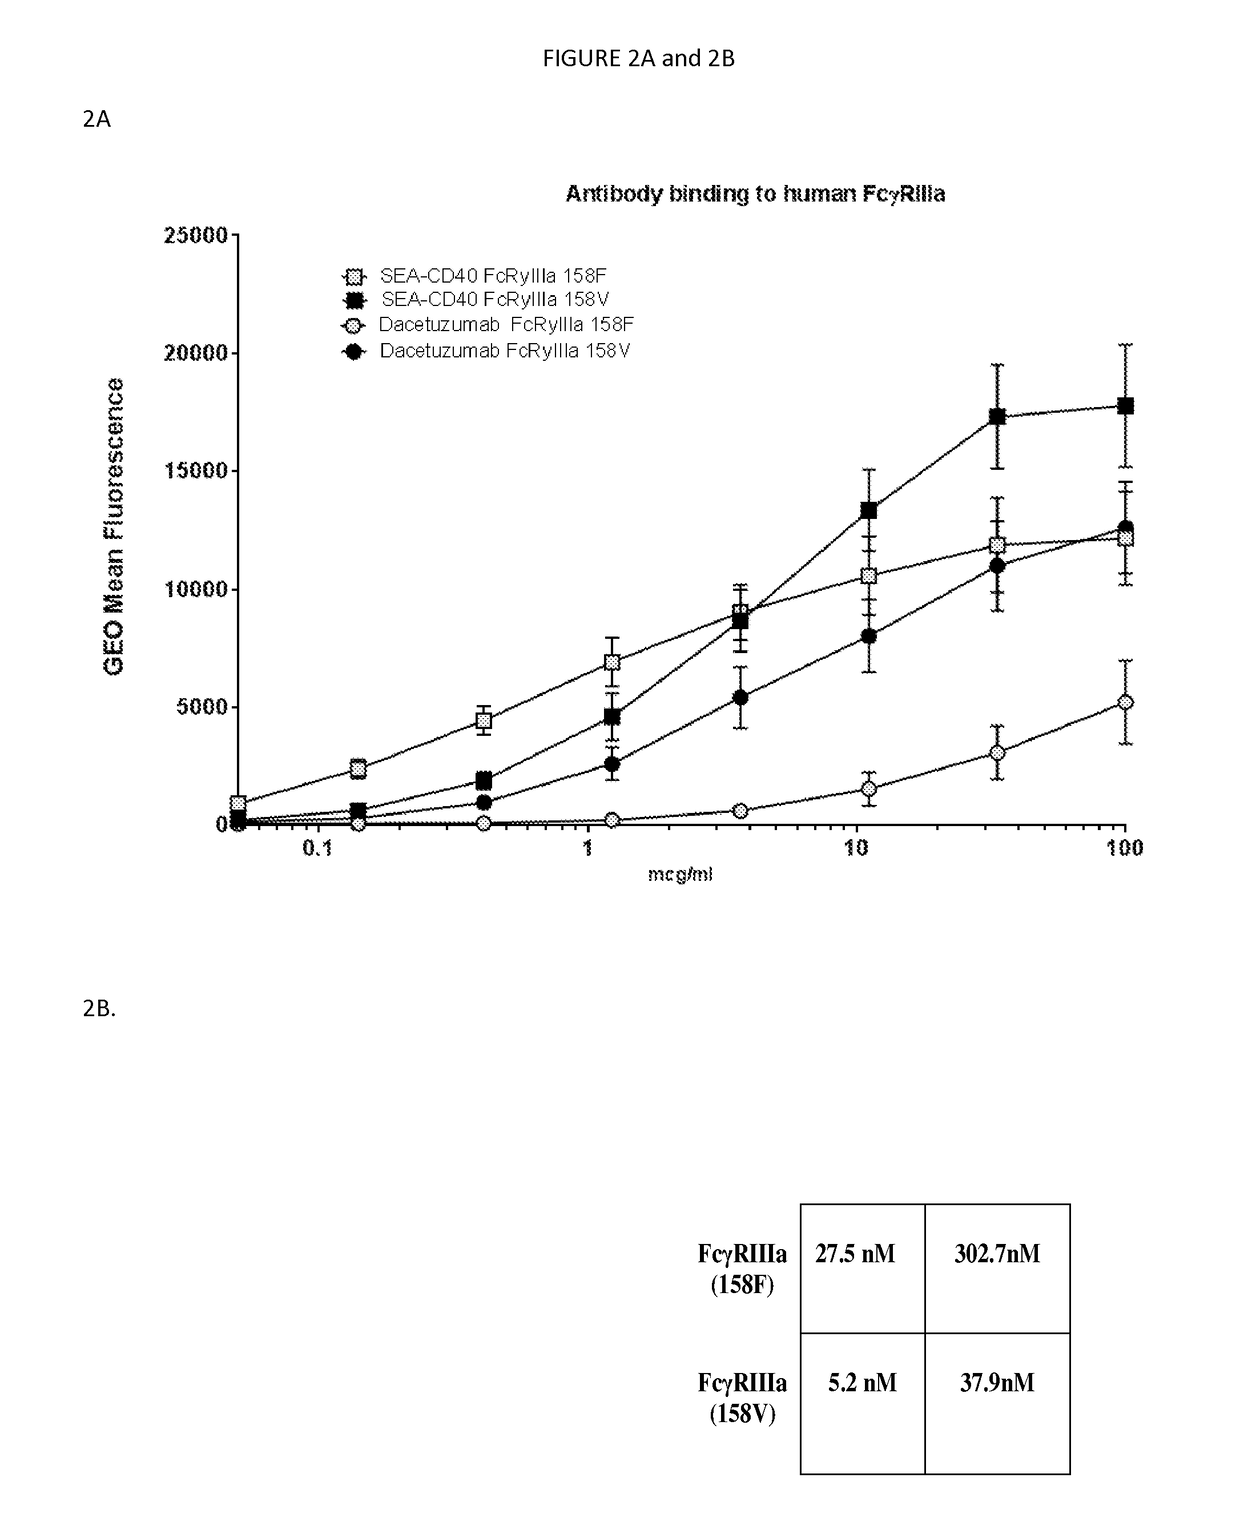 Dosage and administration of non-fucosylated Anti-cd40 antibodies